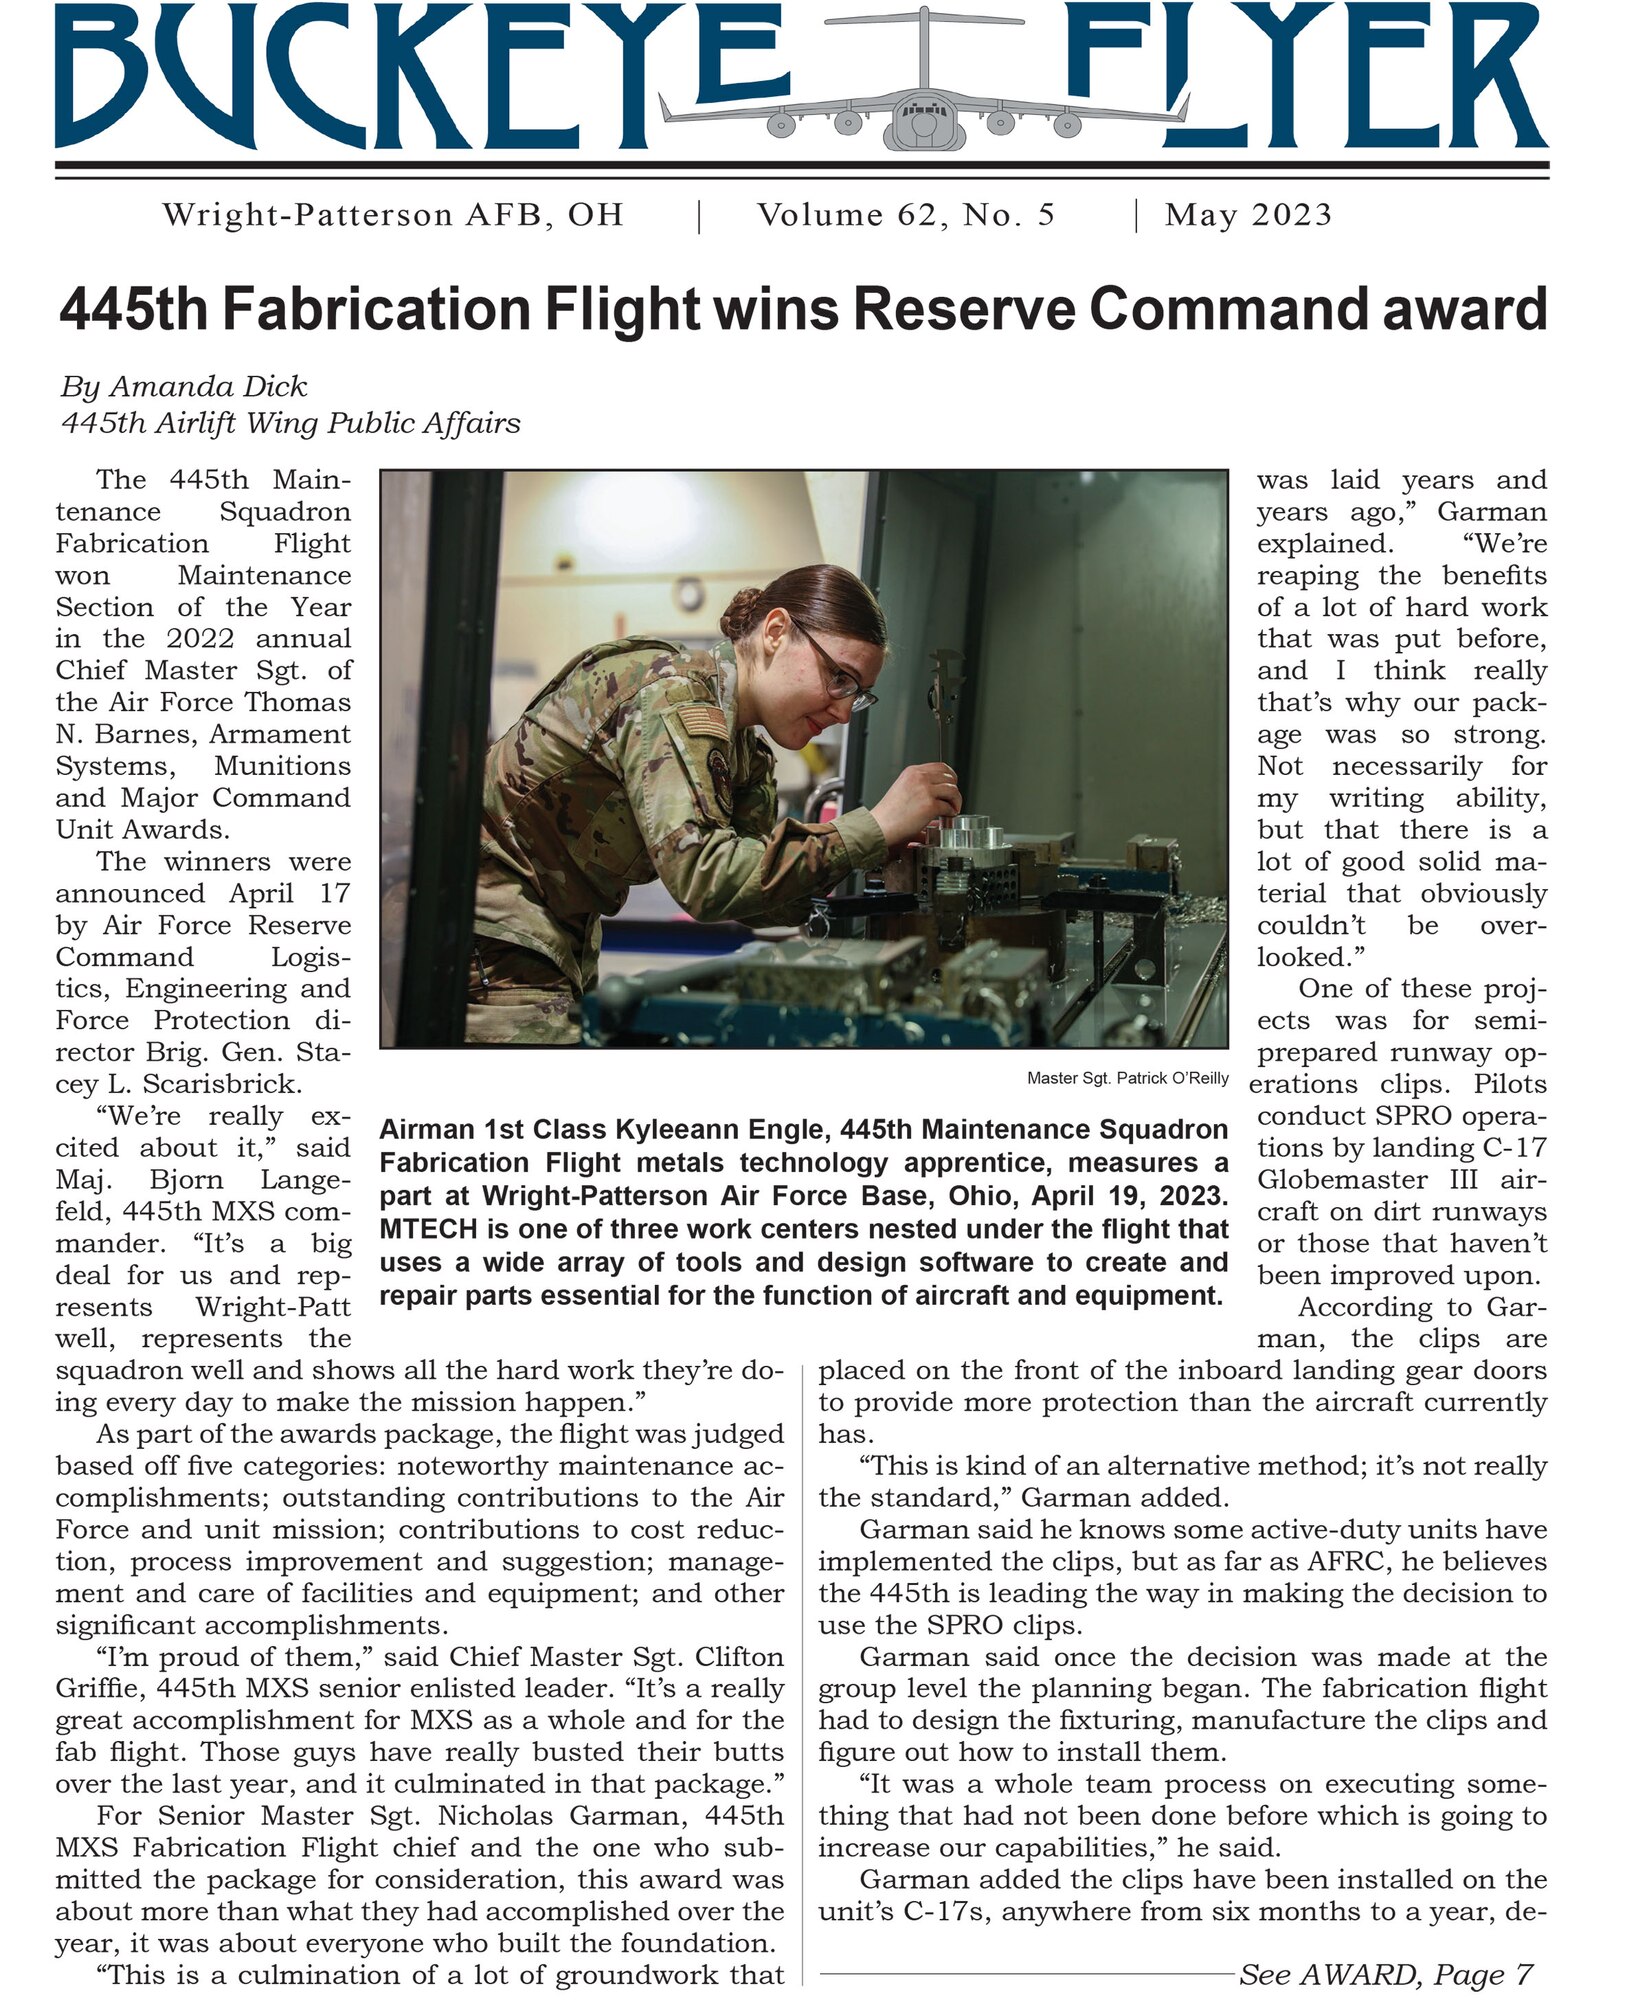 The May 2023 issue of the Buckeye Flyer is now available. The official publication of the 445th Airlift Wing includes eight pages of stories, photos and features pertaining to the 445th Airlift Wing, Air Force Reserve Command and the U.S. Air Force.